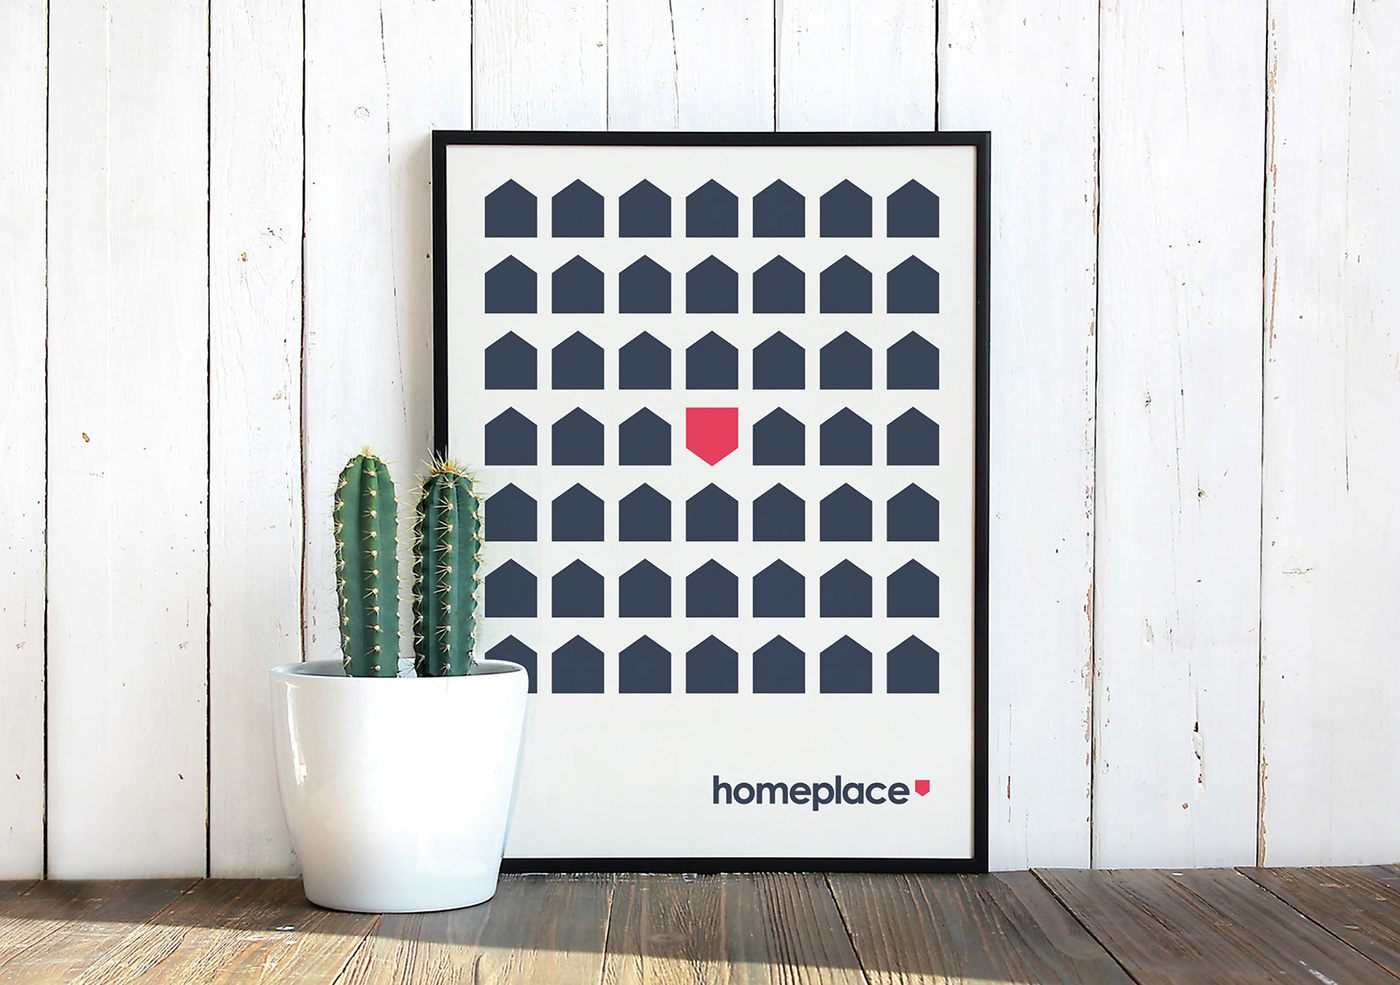 design home Icon identity location logo pattern poster property Signage